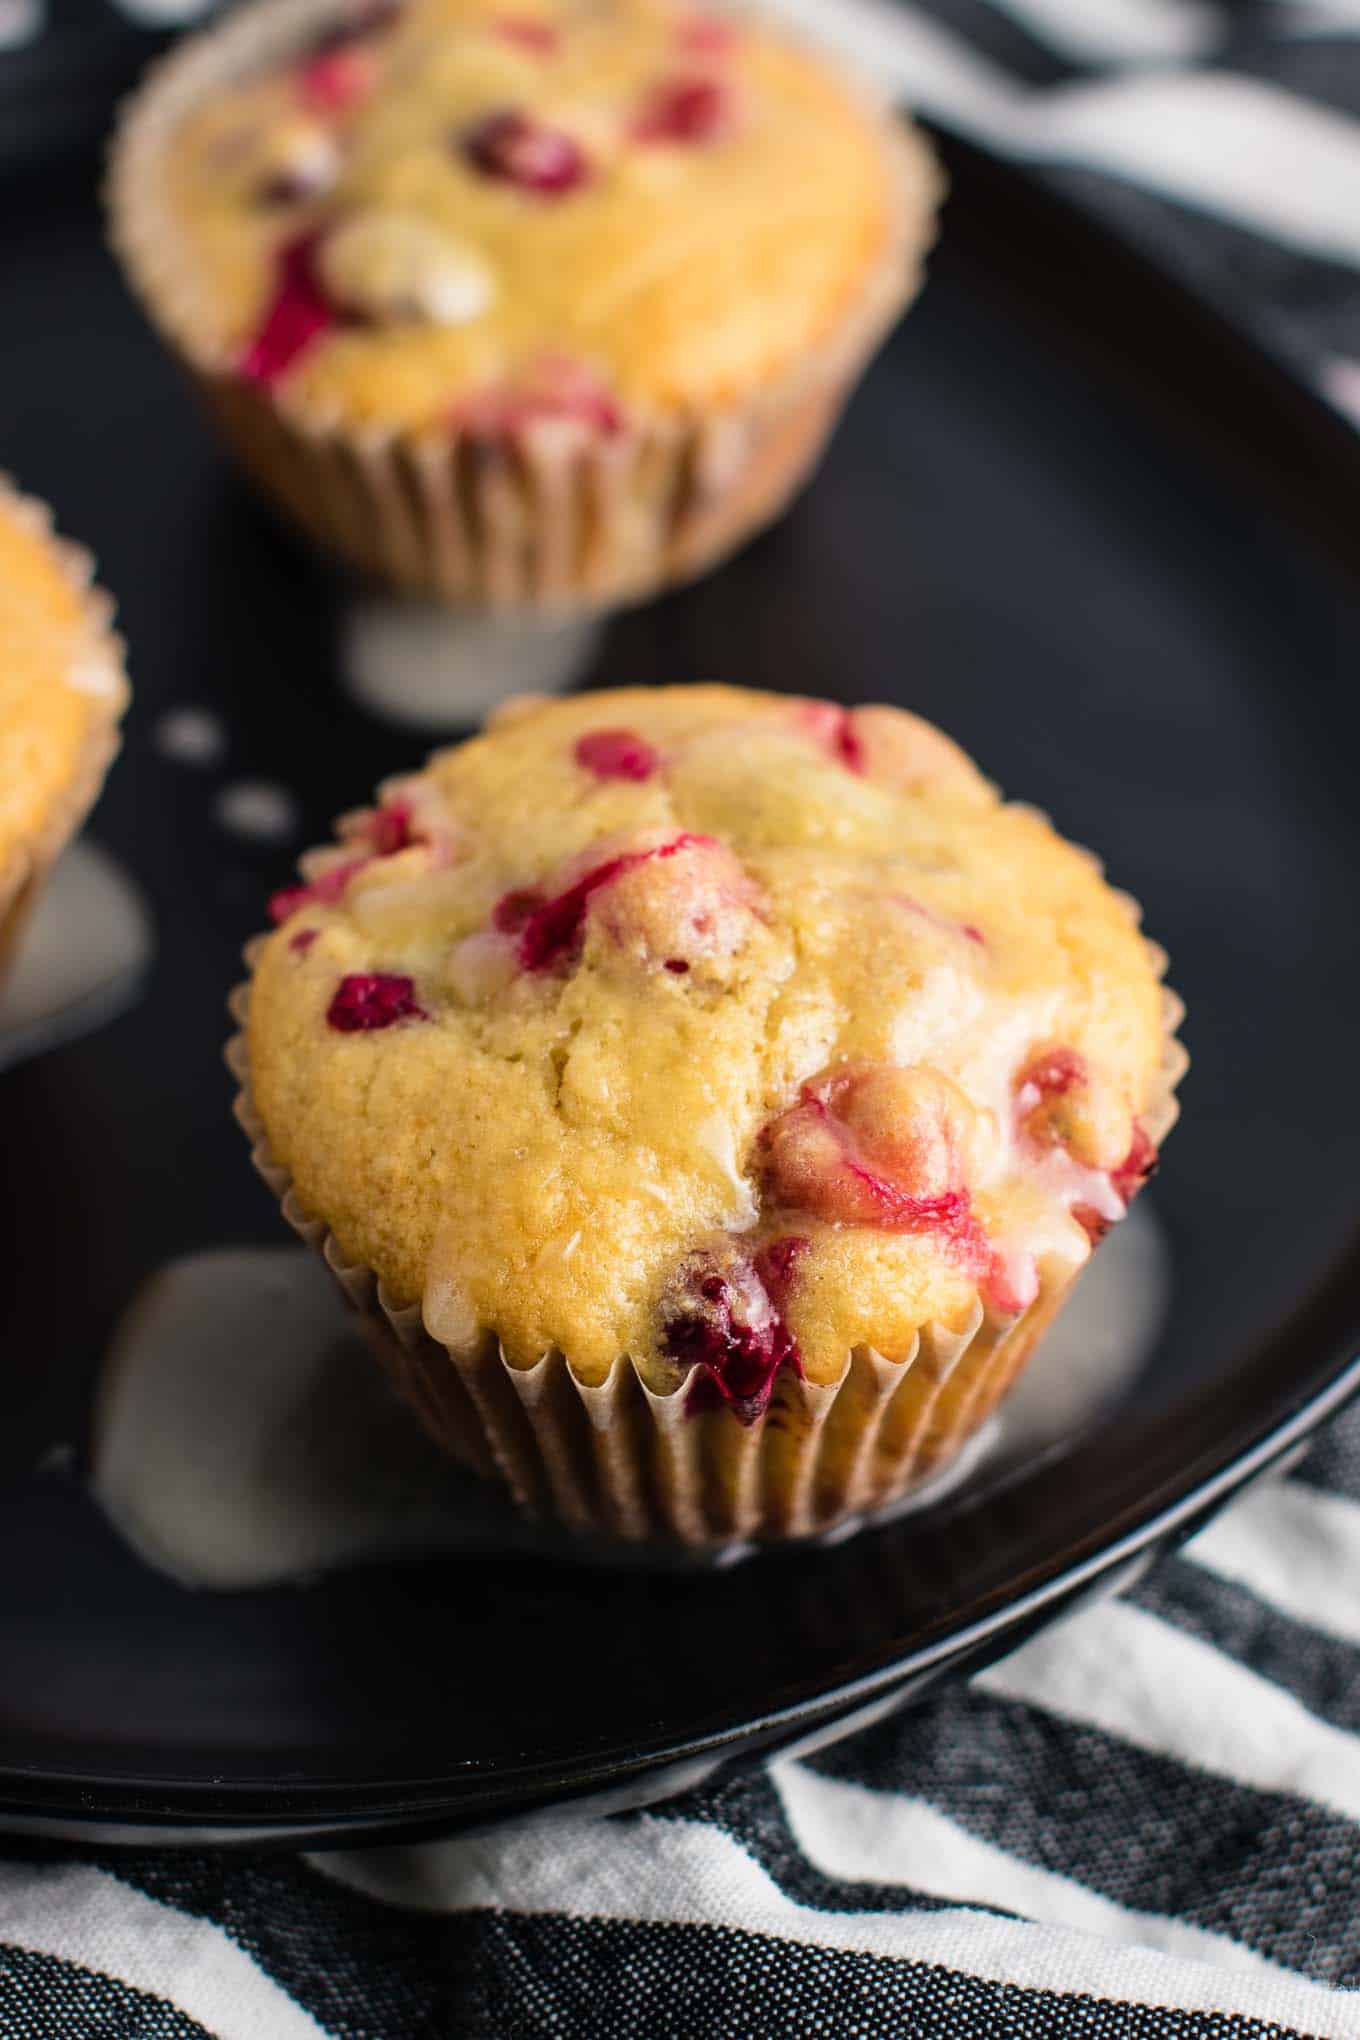 Healthy Cranberry Orange Muffins recipe made with greek yogurt and whole wheat pastry flour with a sweet orange glze. A healthier holiday breakfast or dessert! #breakfast #cranberry #muffins #cranberryorangemuffins #healthy